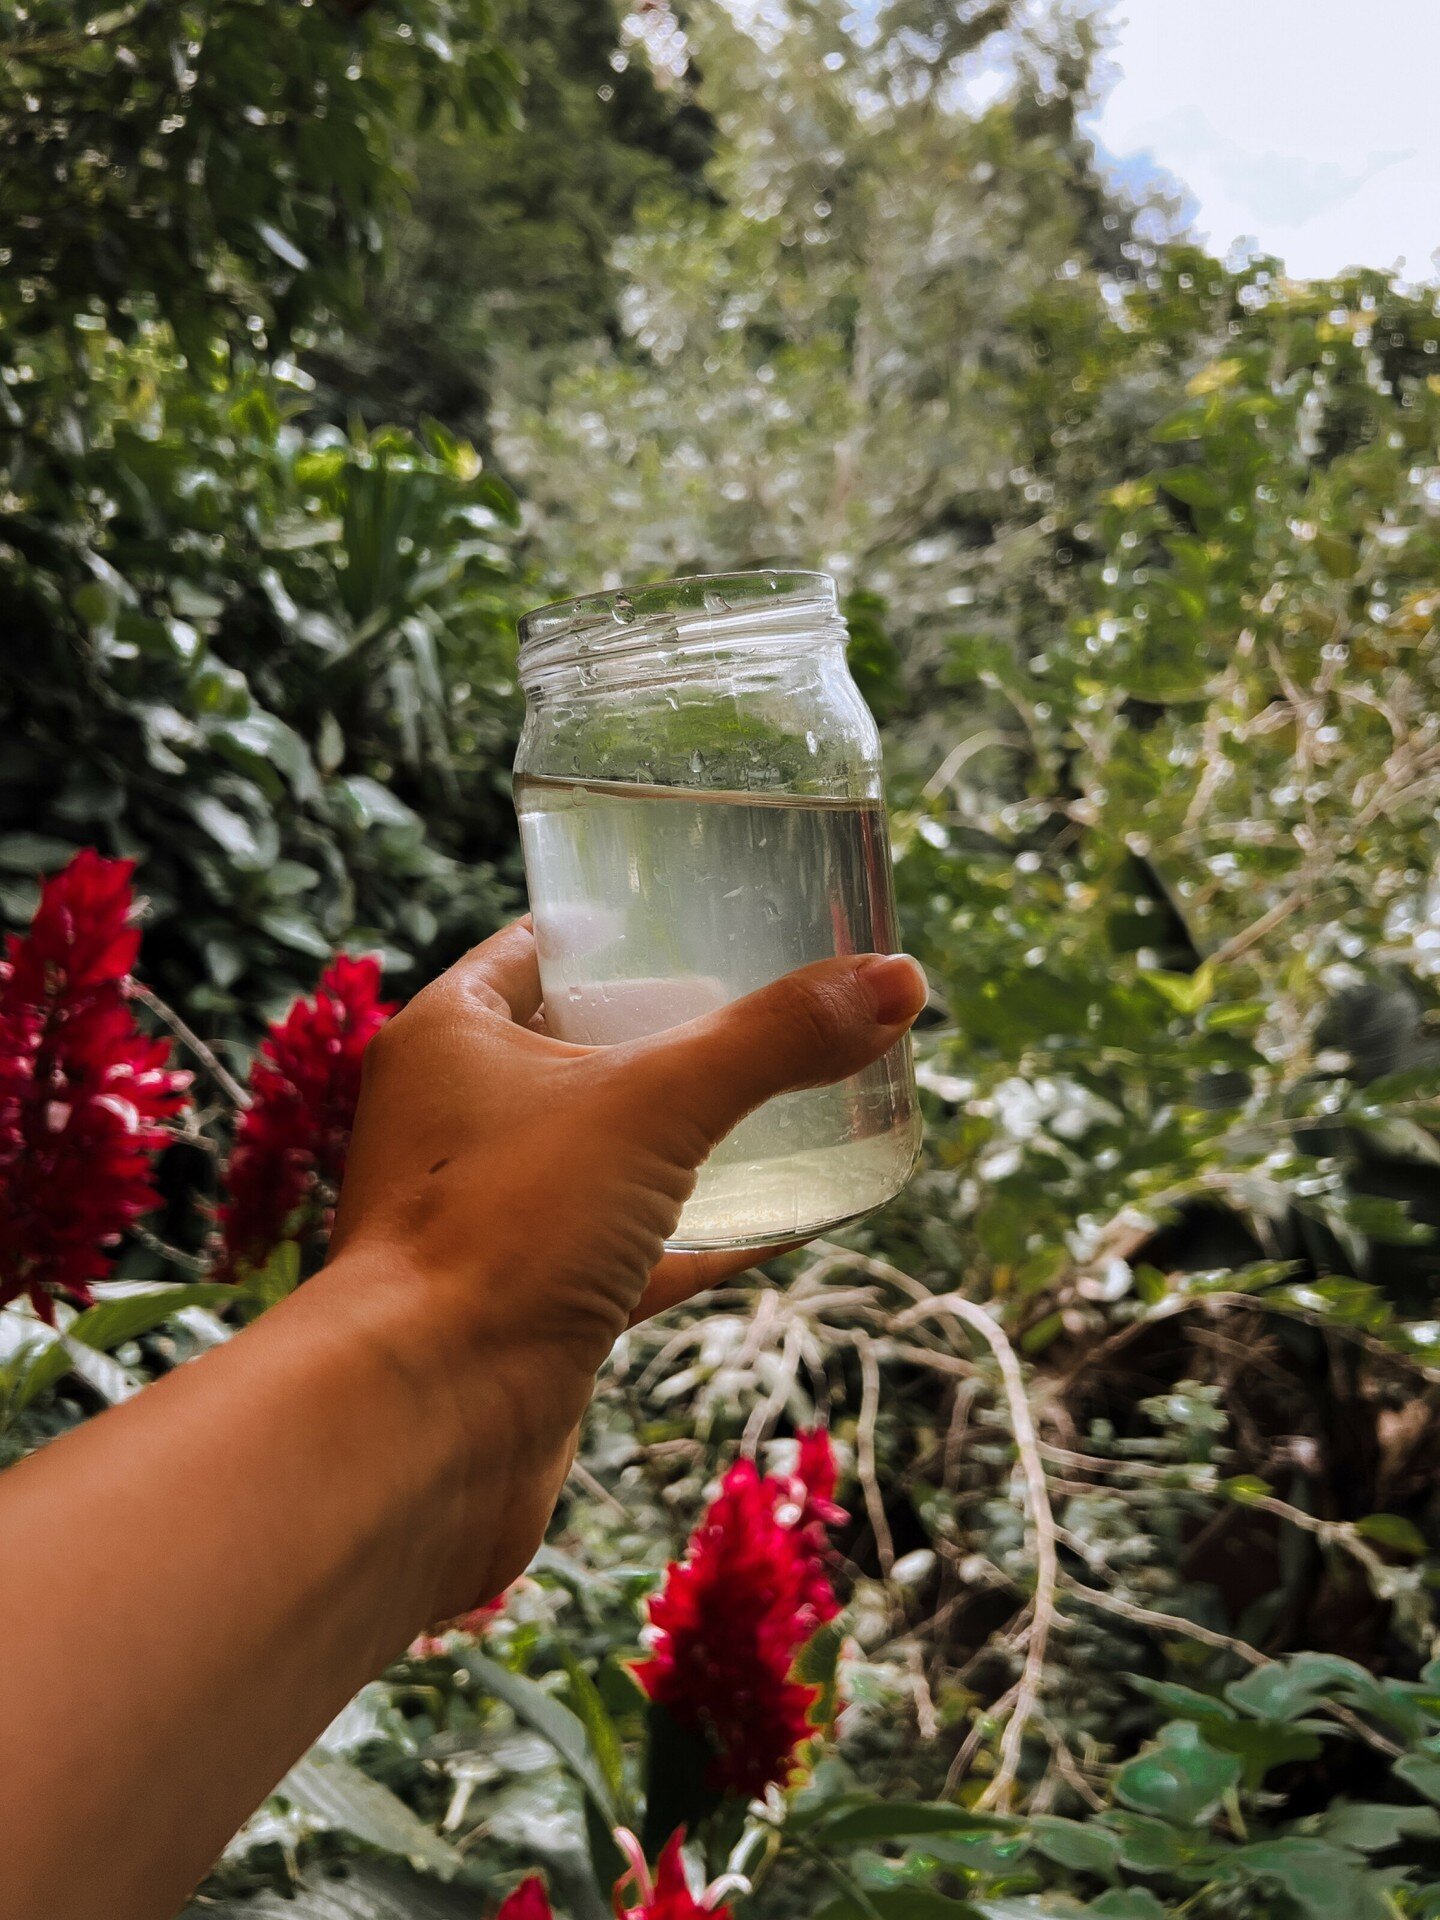 Unsure of the best way to take your minerals? Here's a tip! One of our favorite ways is to squeeze 10 drops of your Simplicity Biome minerals into a glass, squeeze a slice of fresh lime or lemon, and then add filtered water. Super easy and delicious!